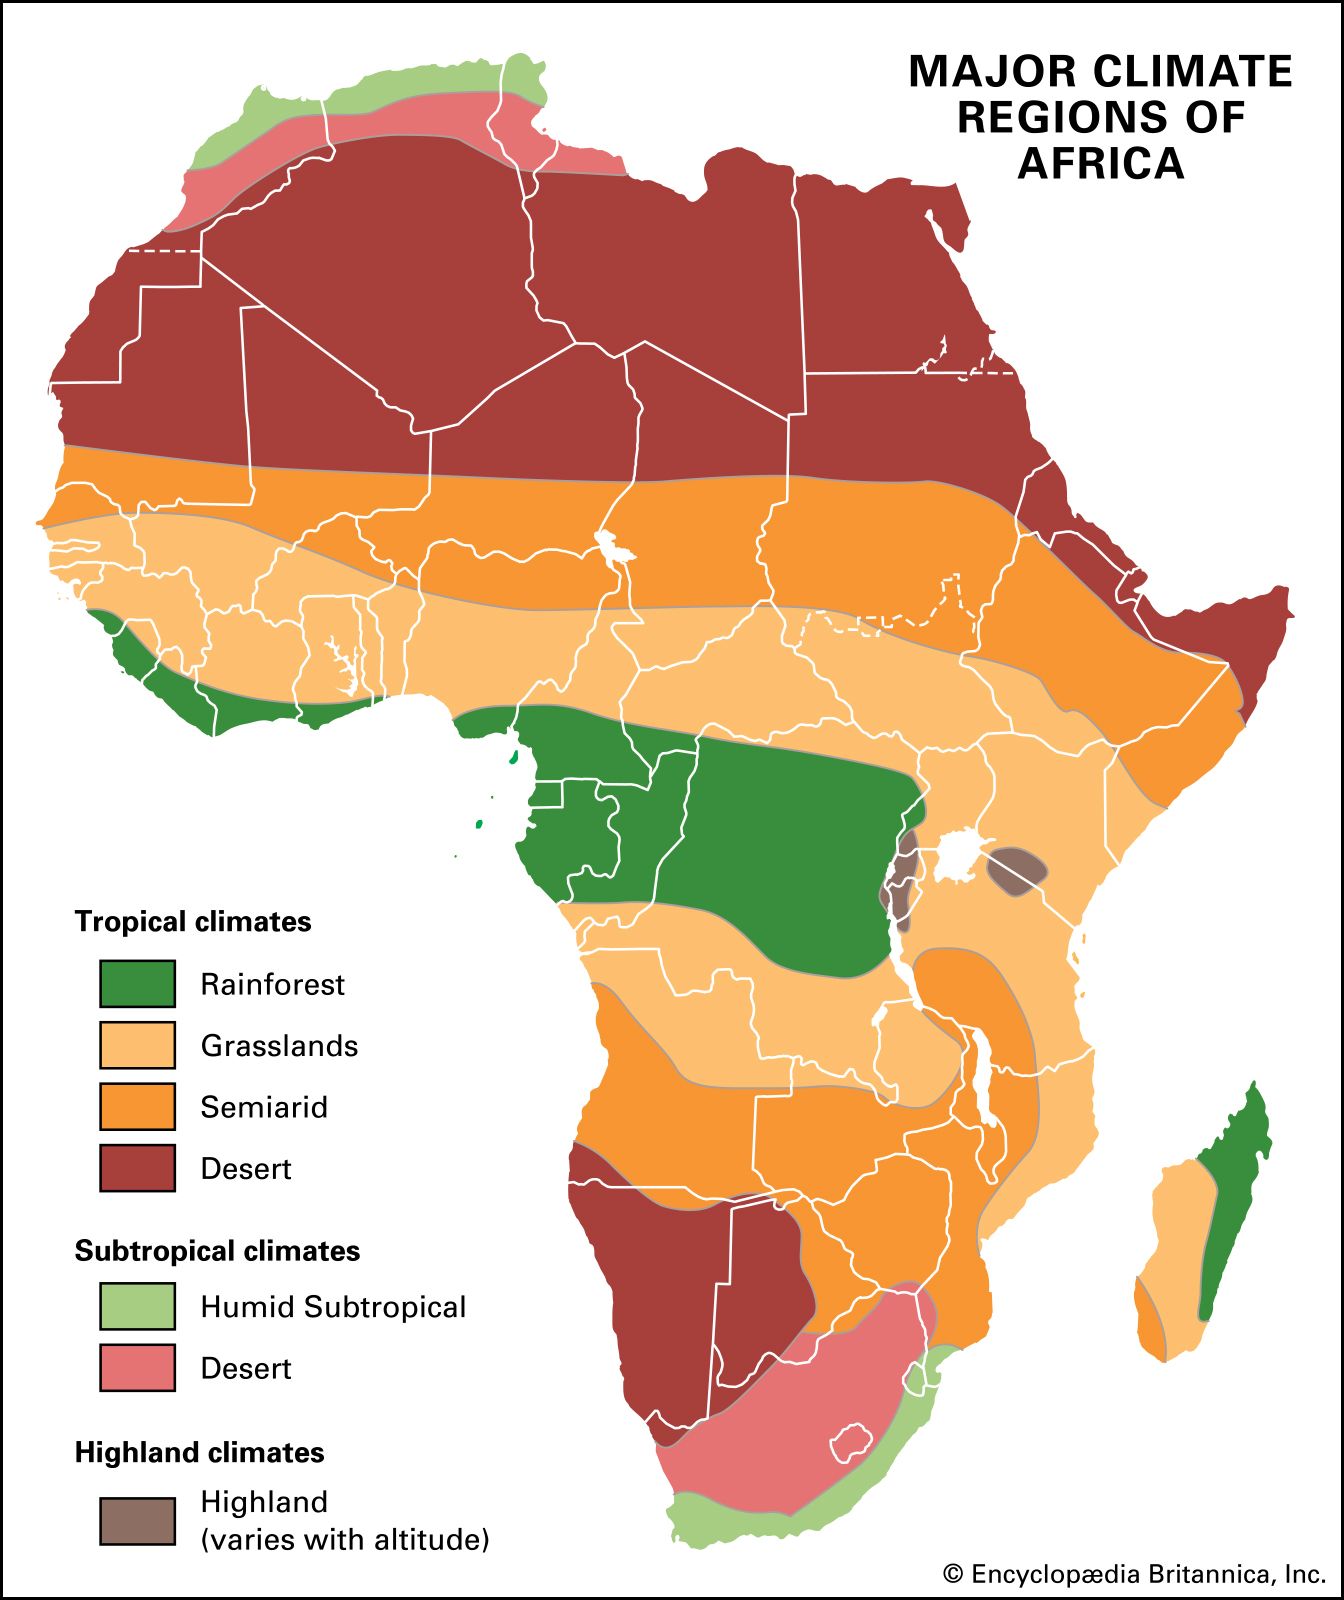 climate-Africa-desert-conditions-fringes-stretches-portion.jpg